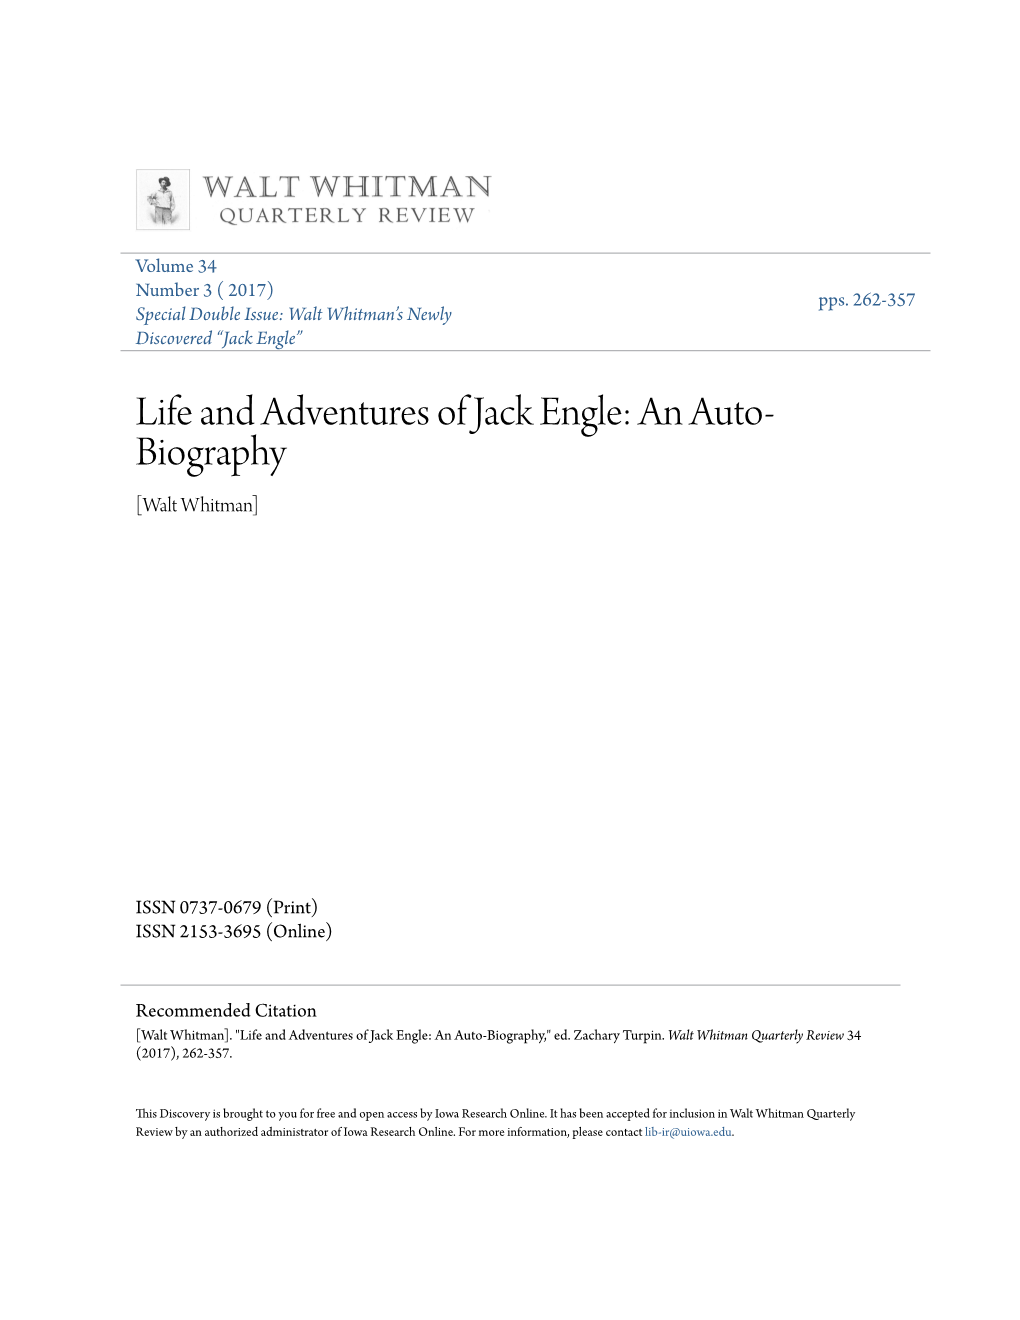 Life and Adventures of Jack Engle: an Auto-Biography," Ed